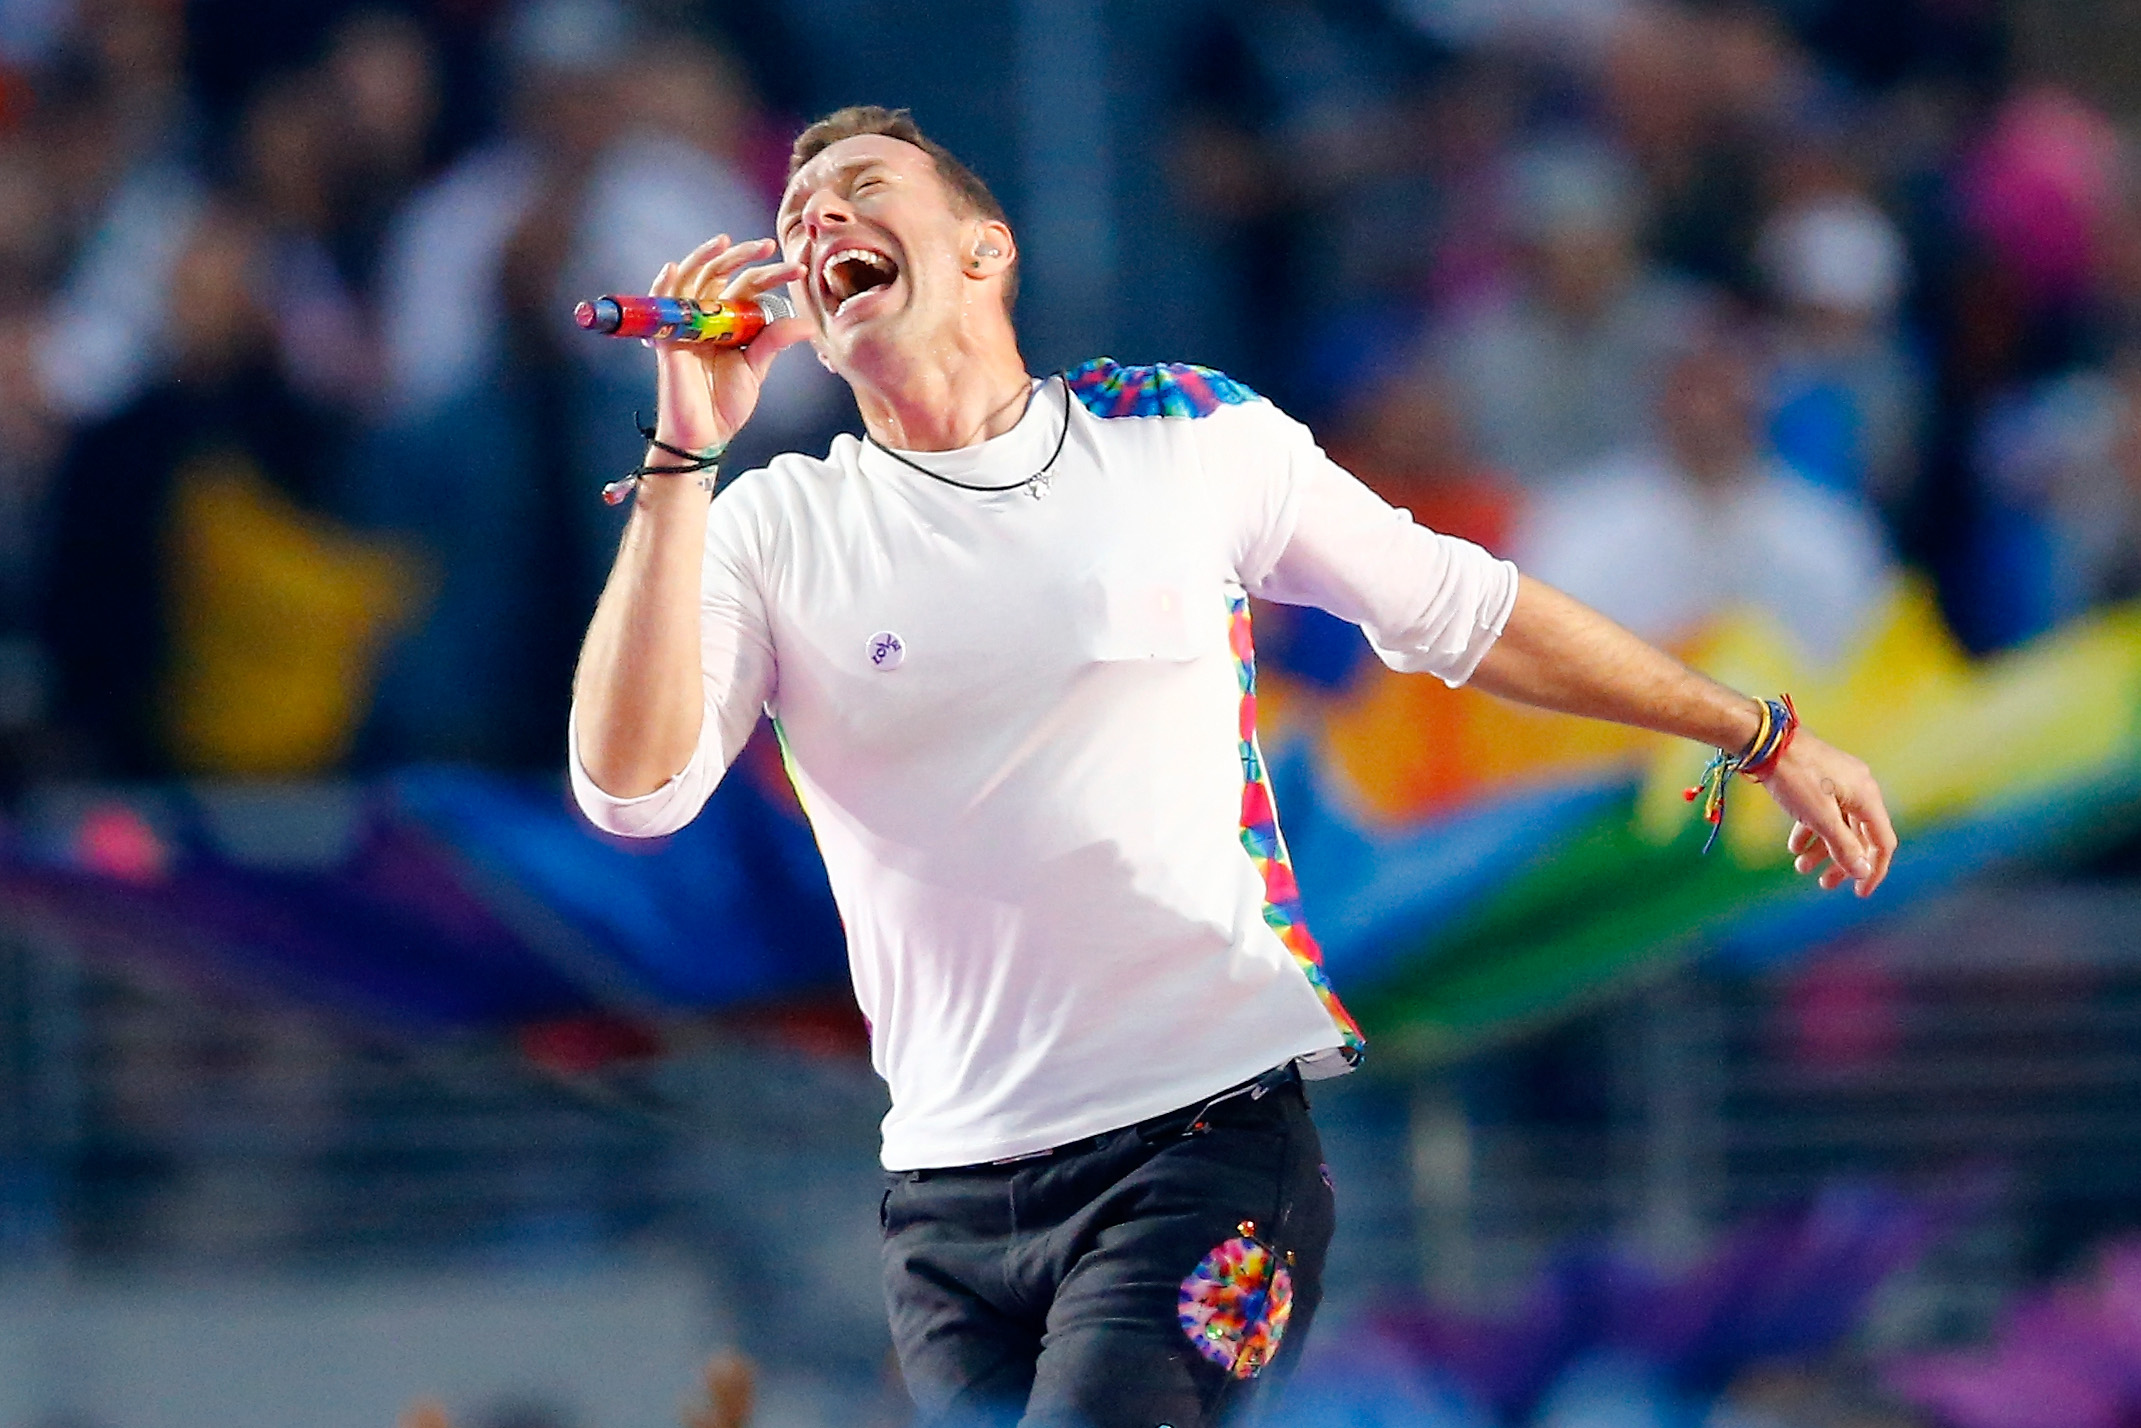 Coldplay delivers colorful Super Bowl 50 halftime show with